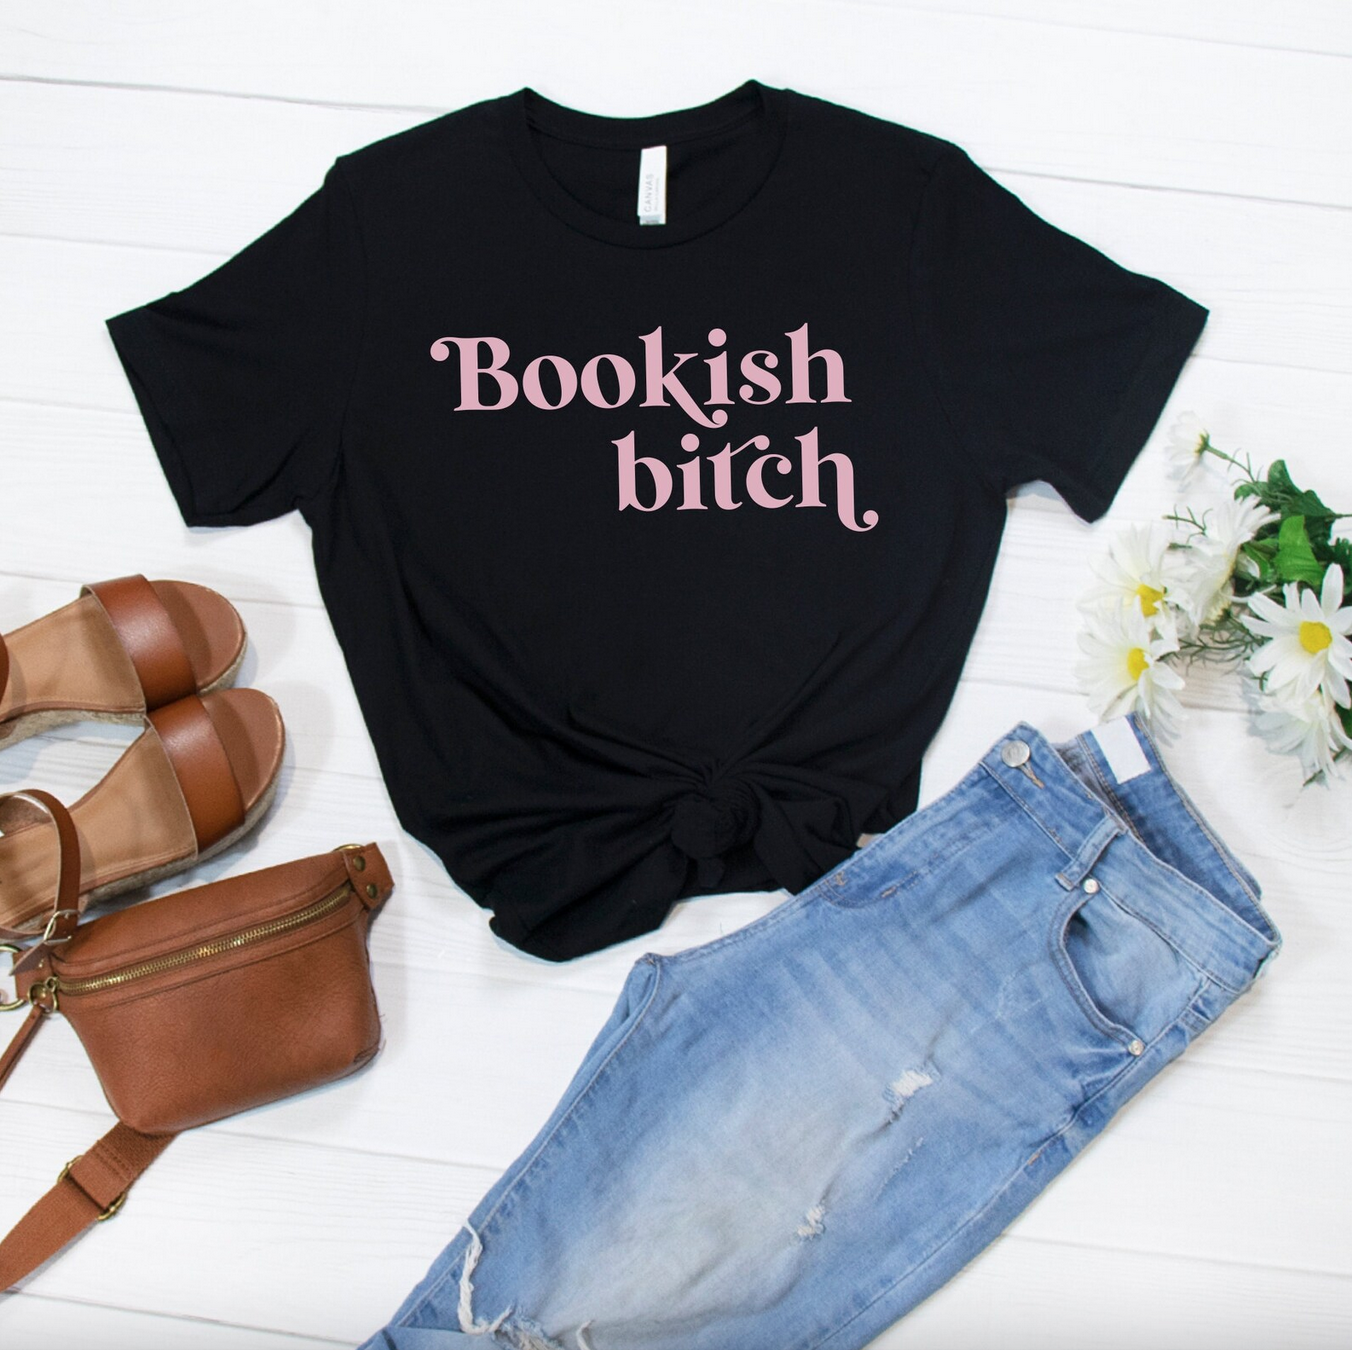 Black tshirt with pink font reading "bookish bitch"